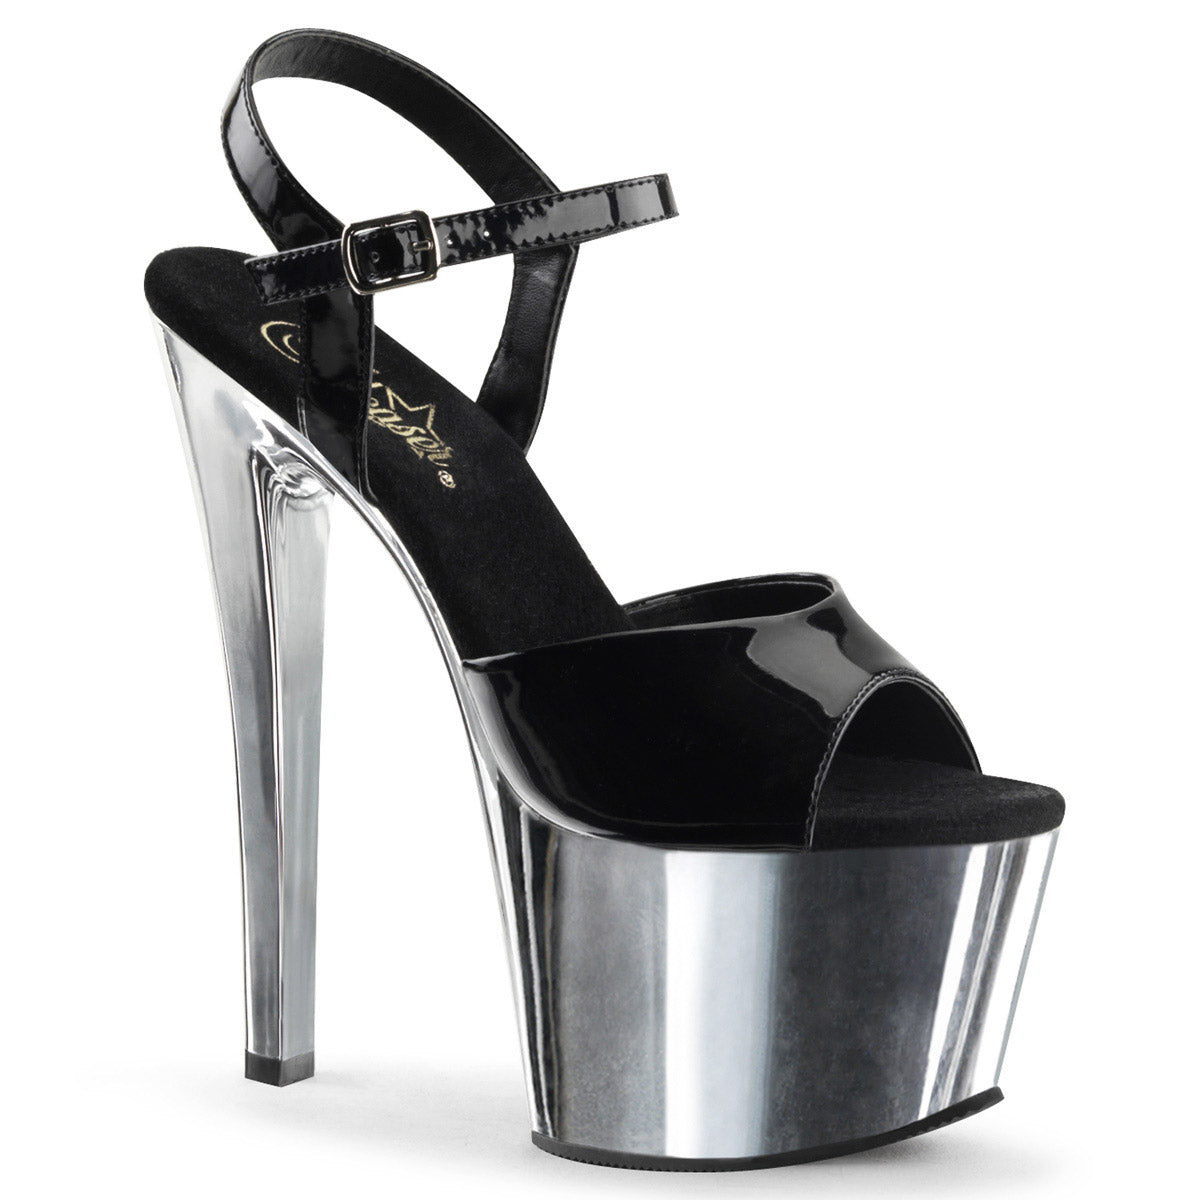 Sexy Platform Stiletto Open Toe Ankle Strap Sandals High Heels Shoes Pleaser  SKY/309